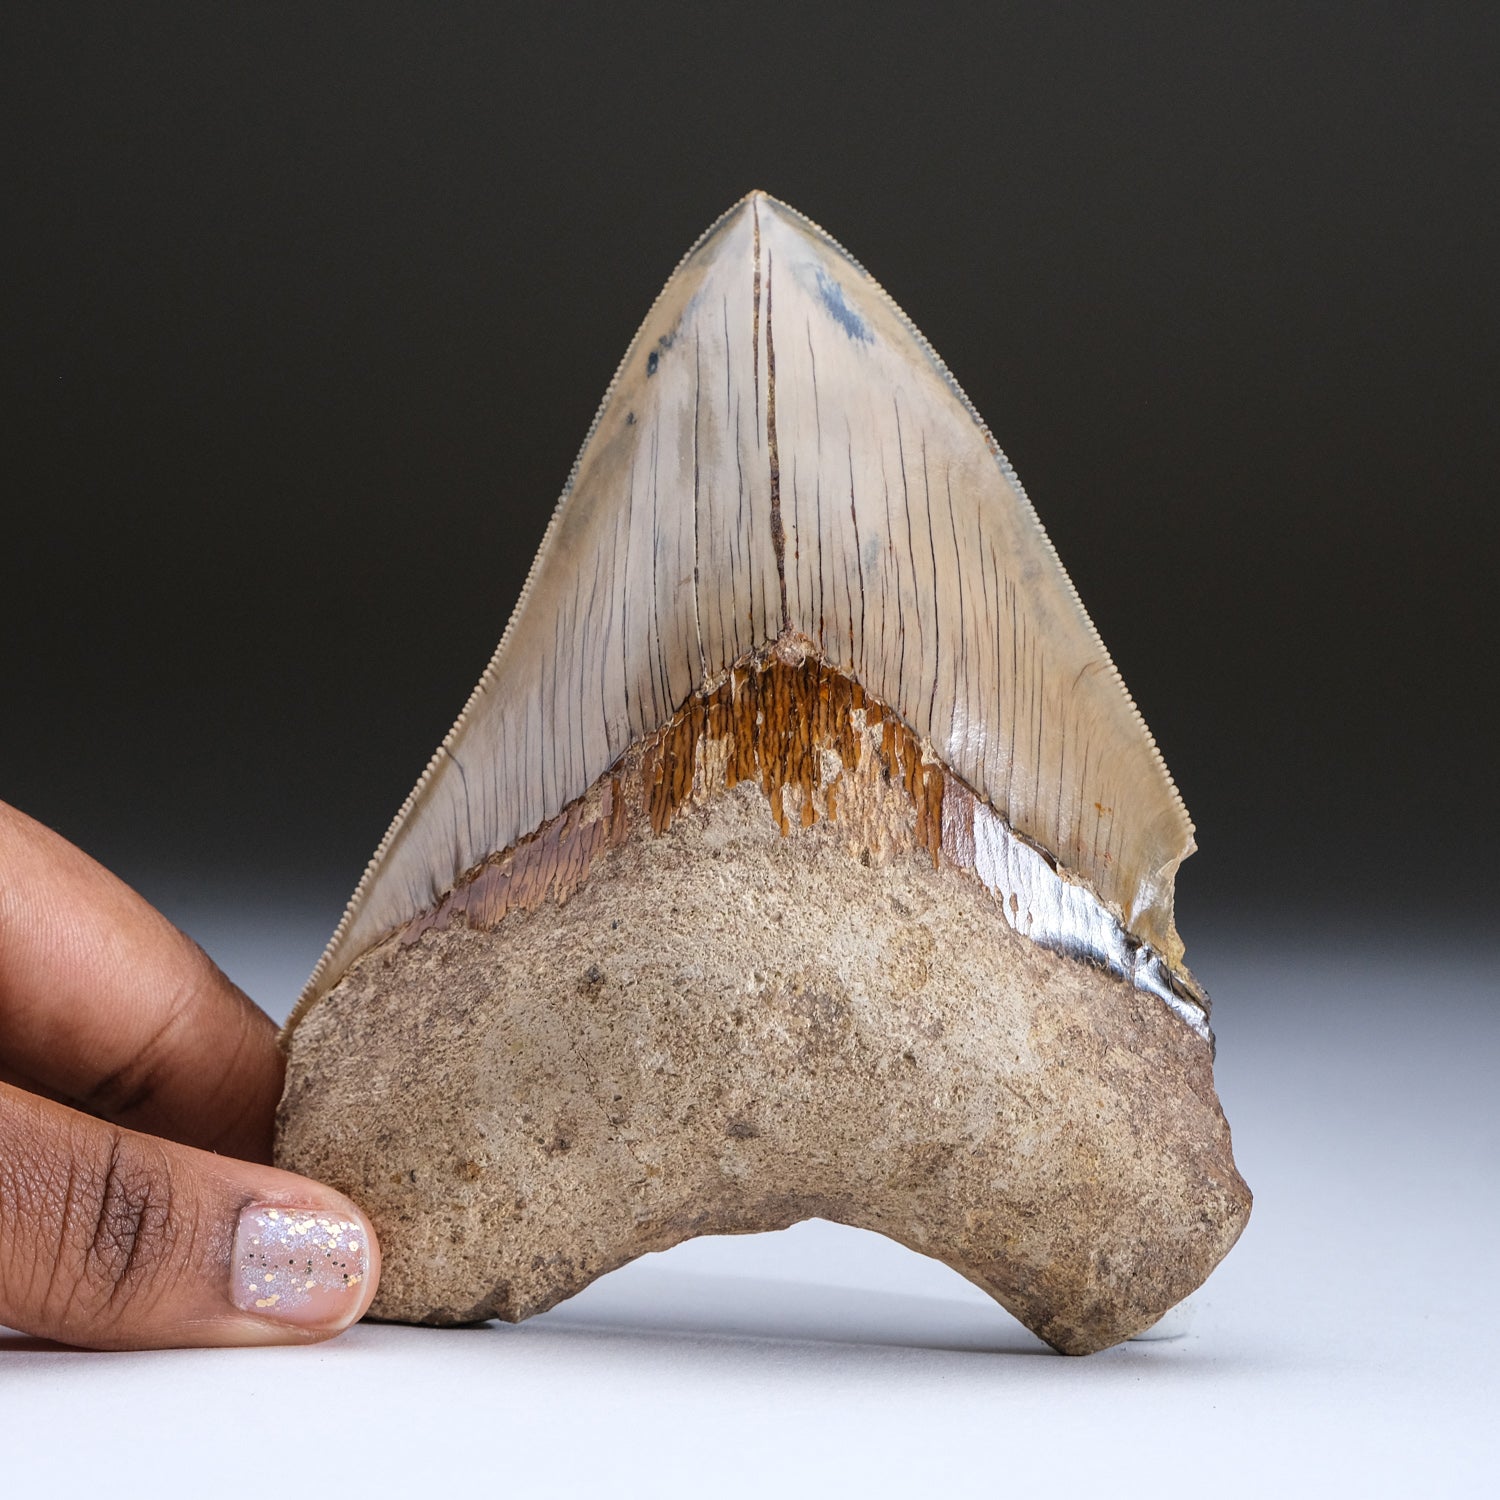 Large 5" Genuine Serrated Megalodon Shark Tooth from Indonesia in Display Box (263 grams)